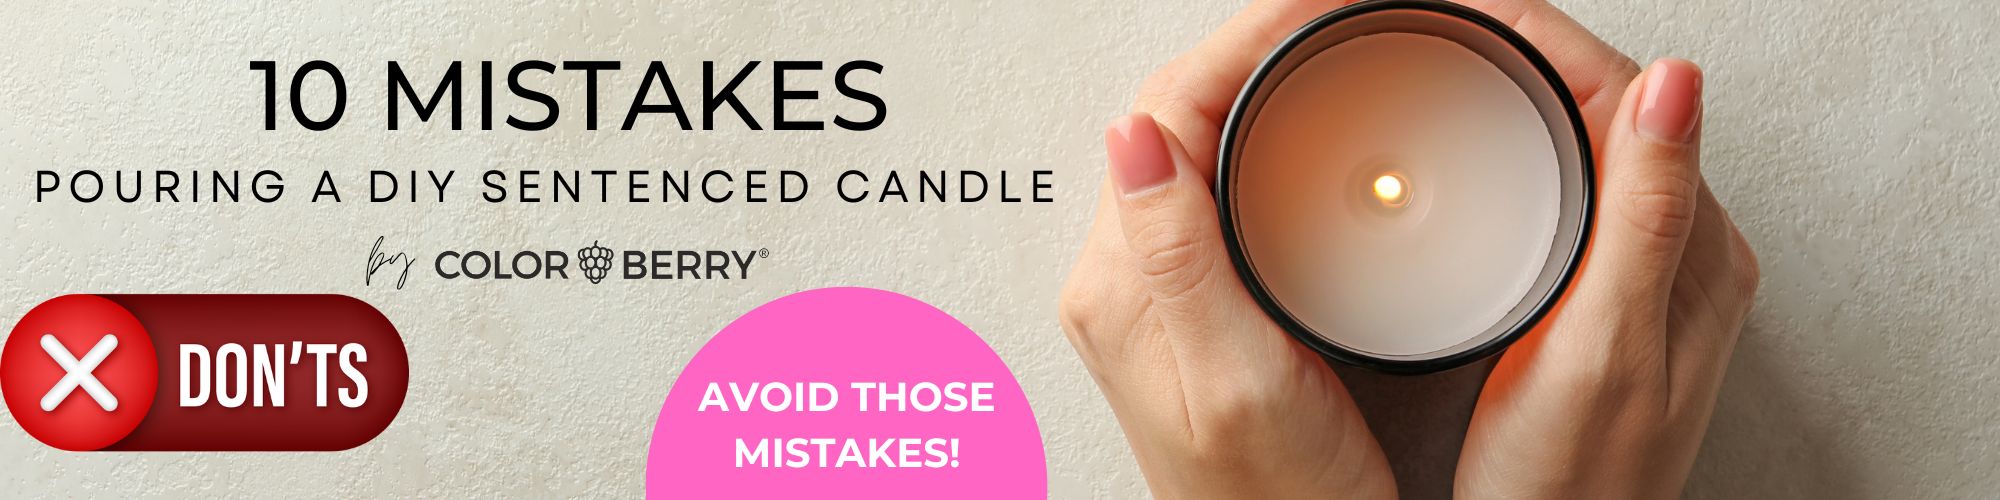 10 biggest mistakes pouring scented candle in my JESIN container